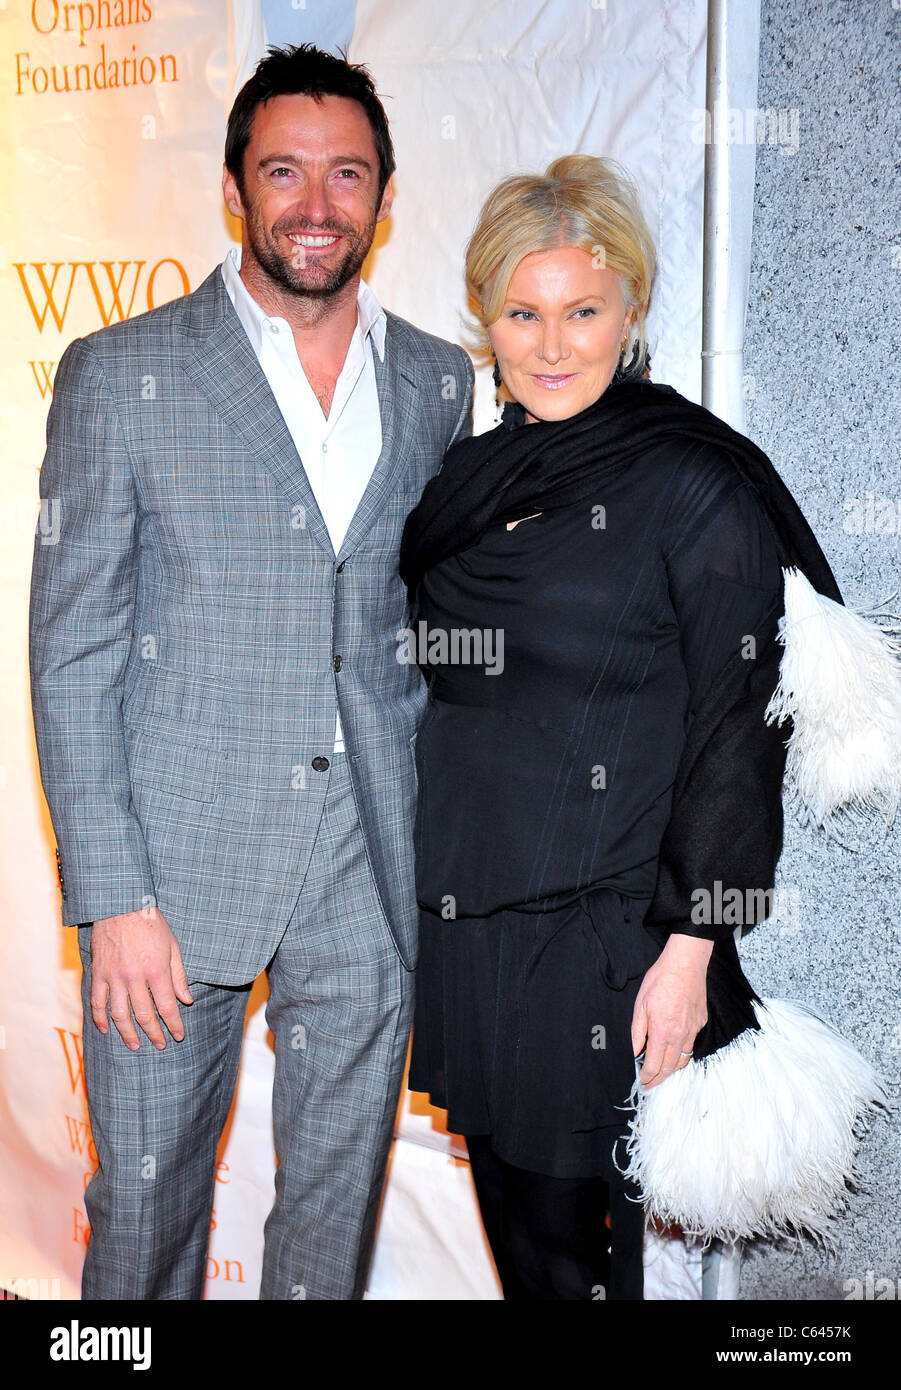 Hugh Jackman, Deborra-Lee Furness at arrivals for Reaching Out and Reaching  Deep - The Worldwide Orphans Foundation's 6th Annual Benefit Gala, Cipriani  Restaurant Wall Street, New York, NY November 1, 2010. Photo